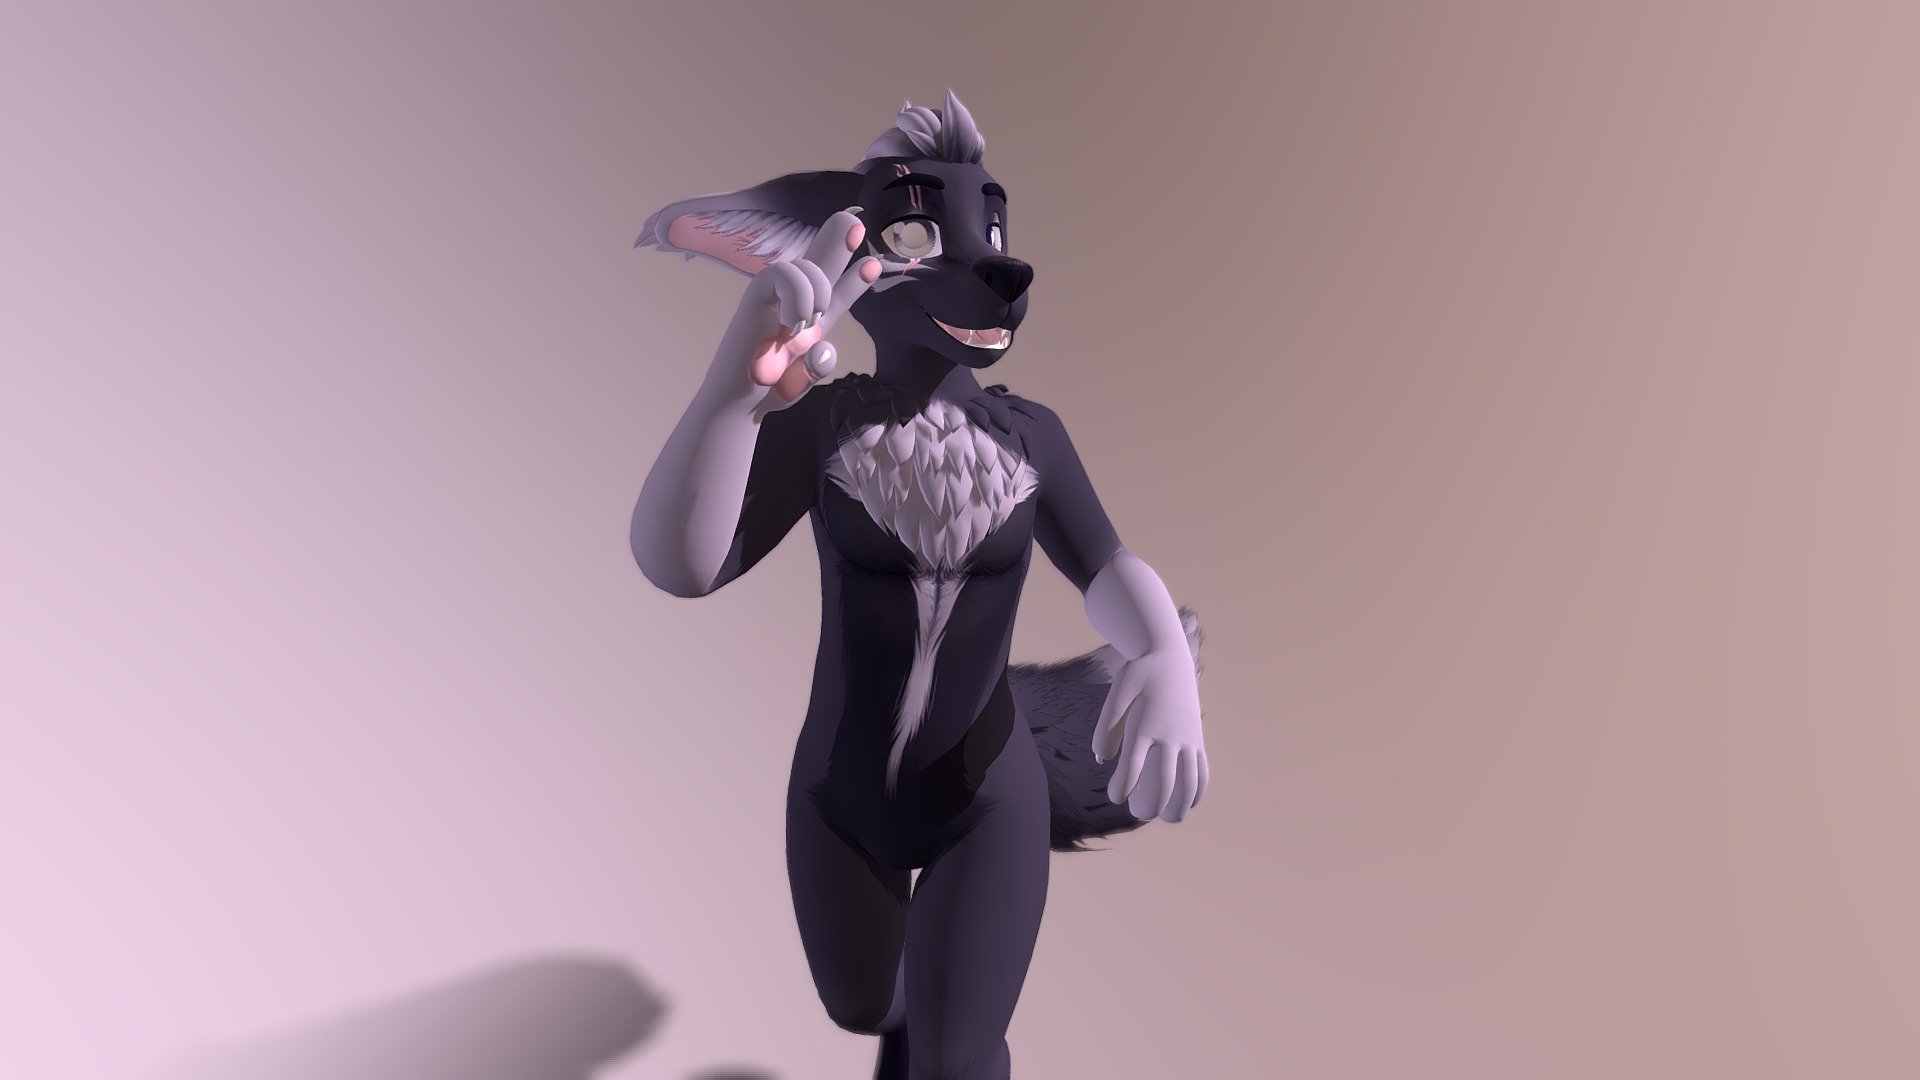 Vorii Vrchat Avatar 3d Model By Meelo [458202e] Sketchfab